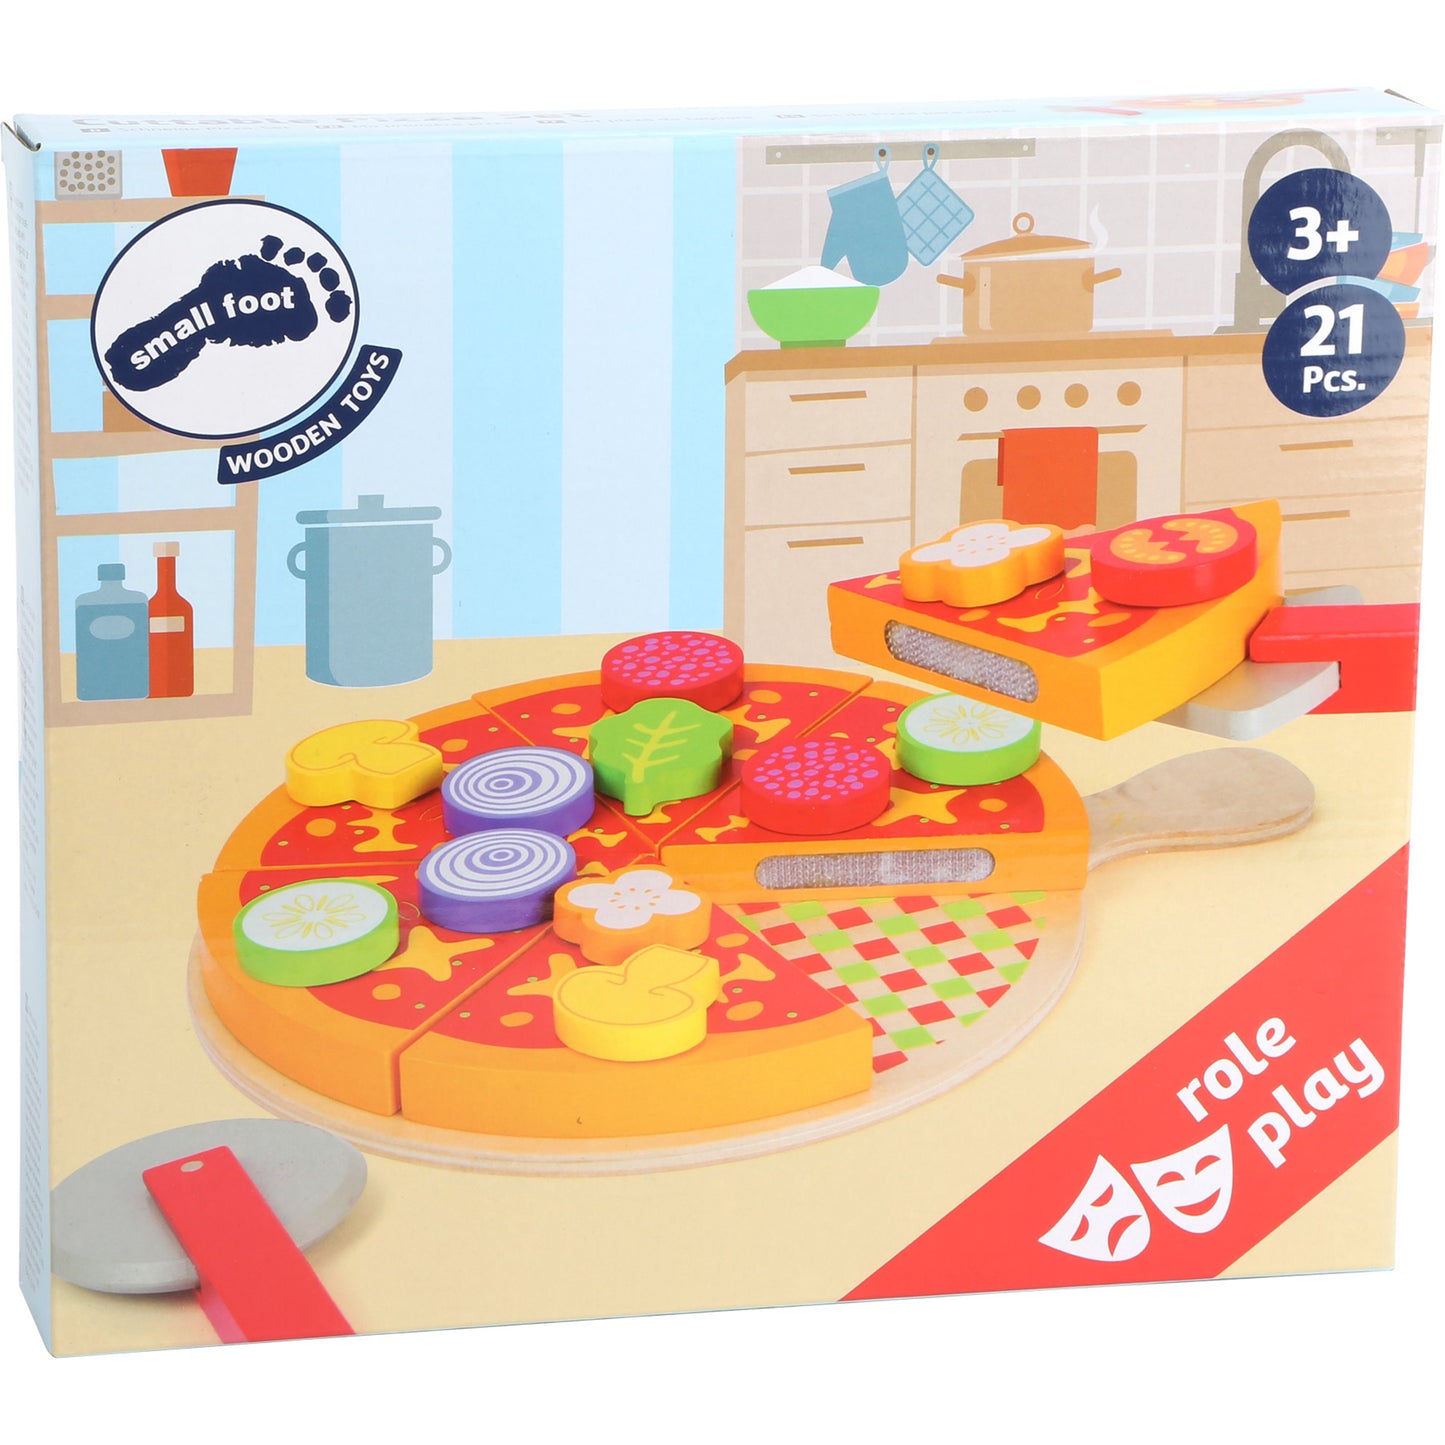 Cuttable Pizza Playset